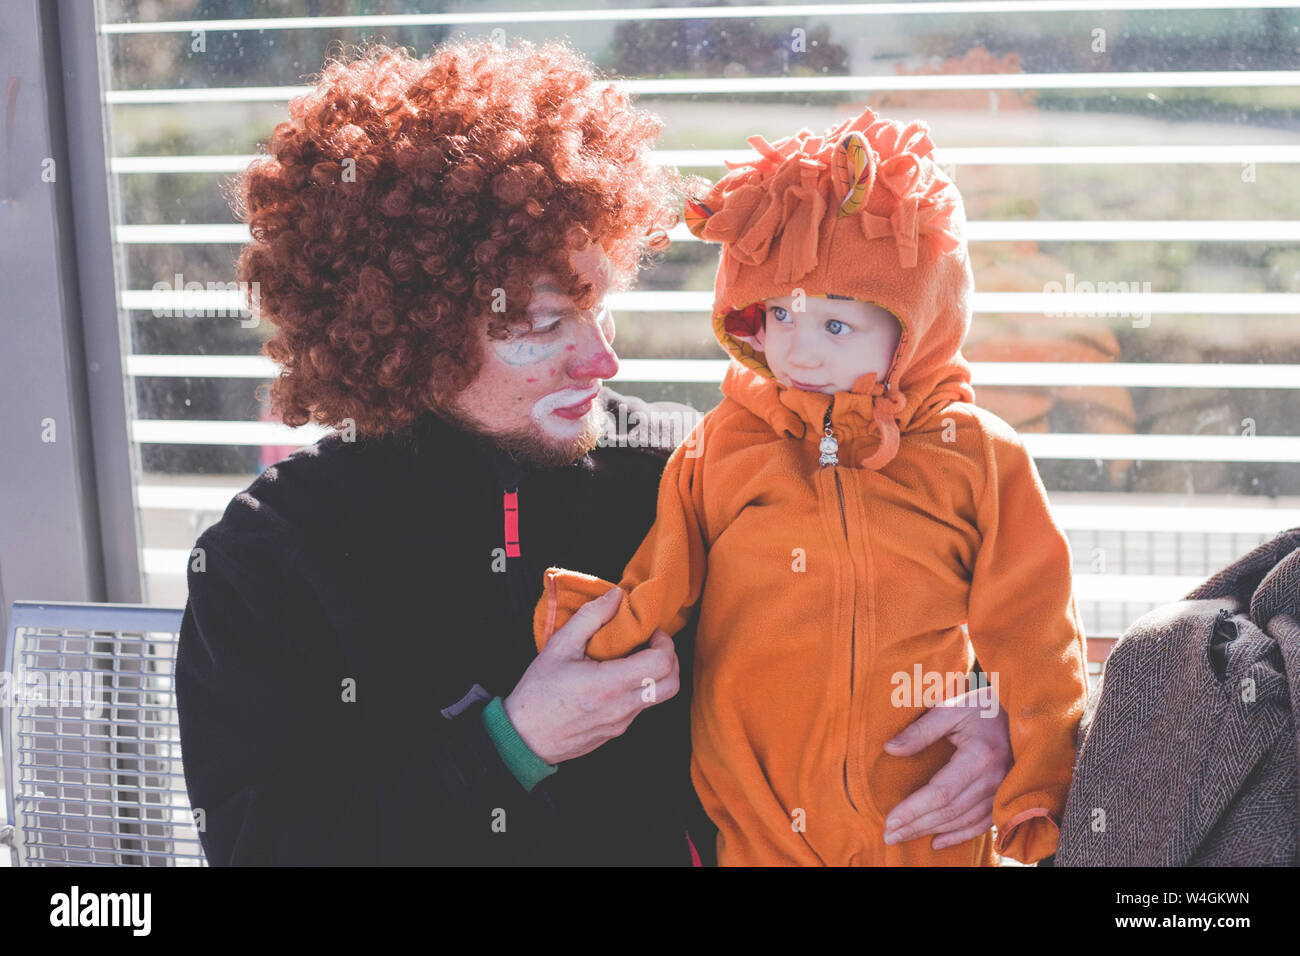 Man dressed up as a clown and little boy dressed up as lion baby at carnival Stock Photo